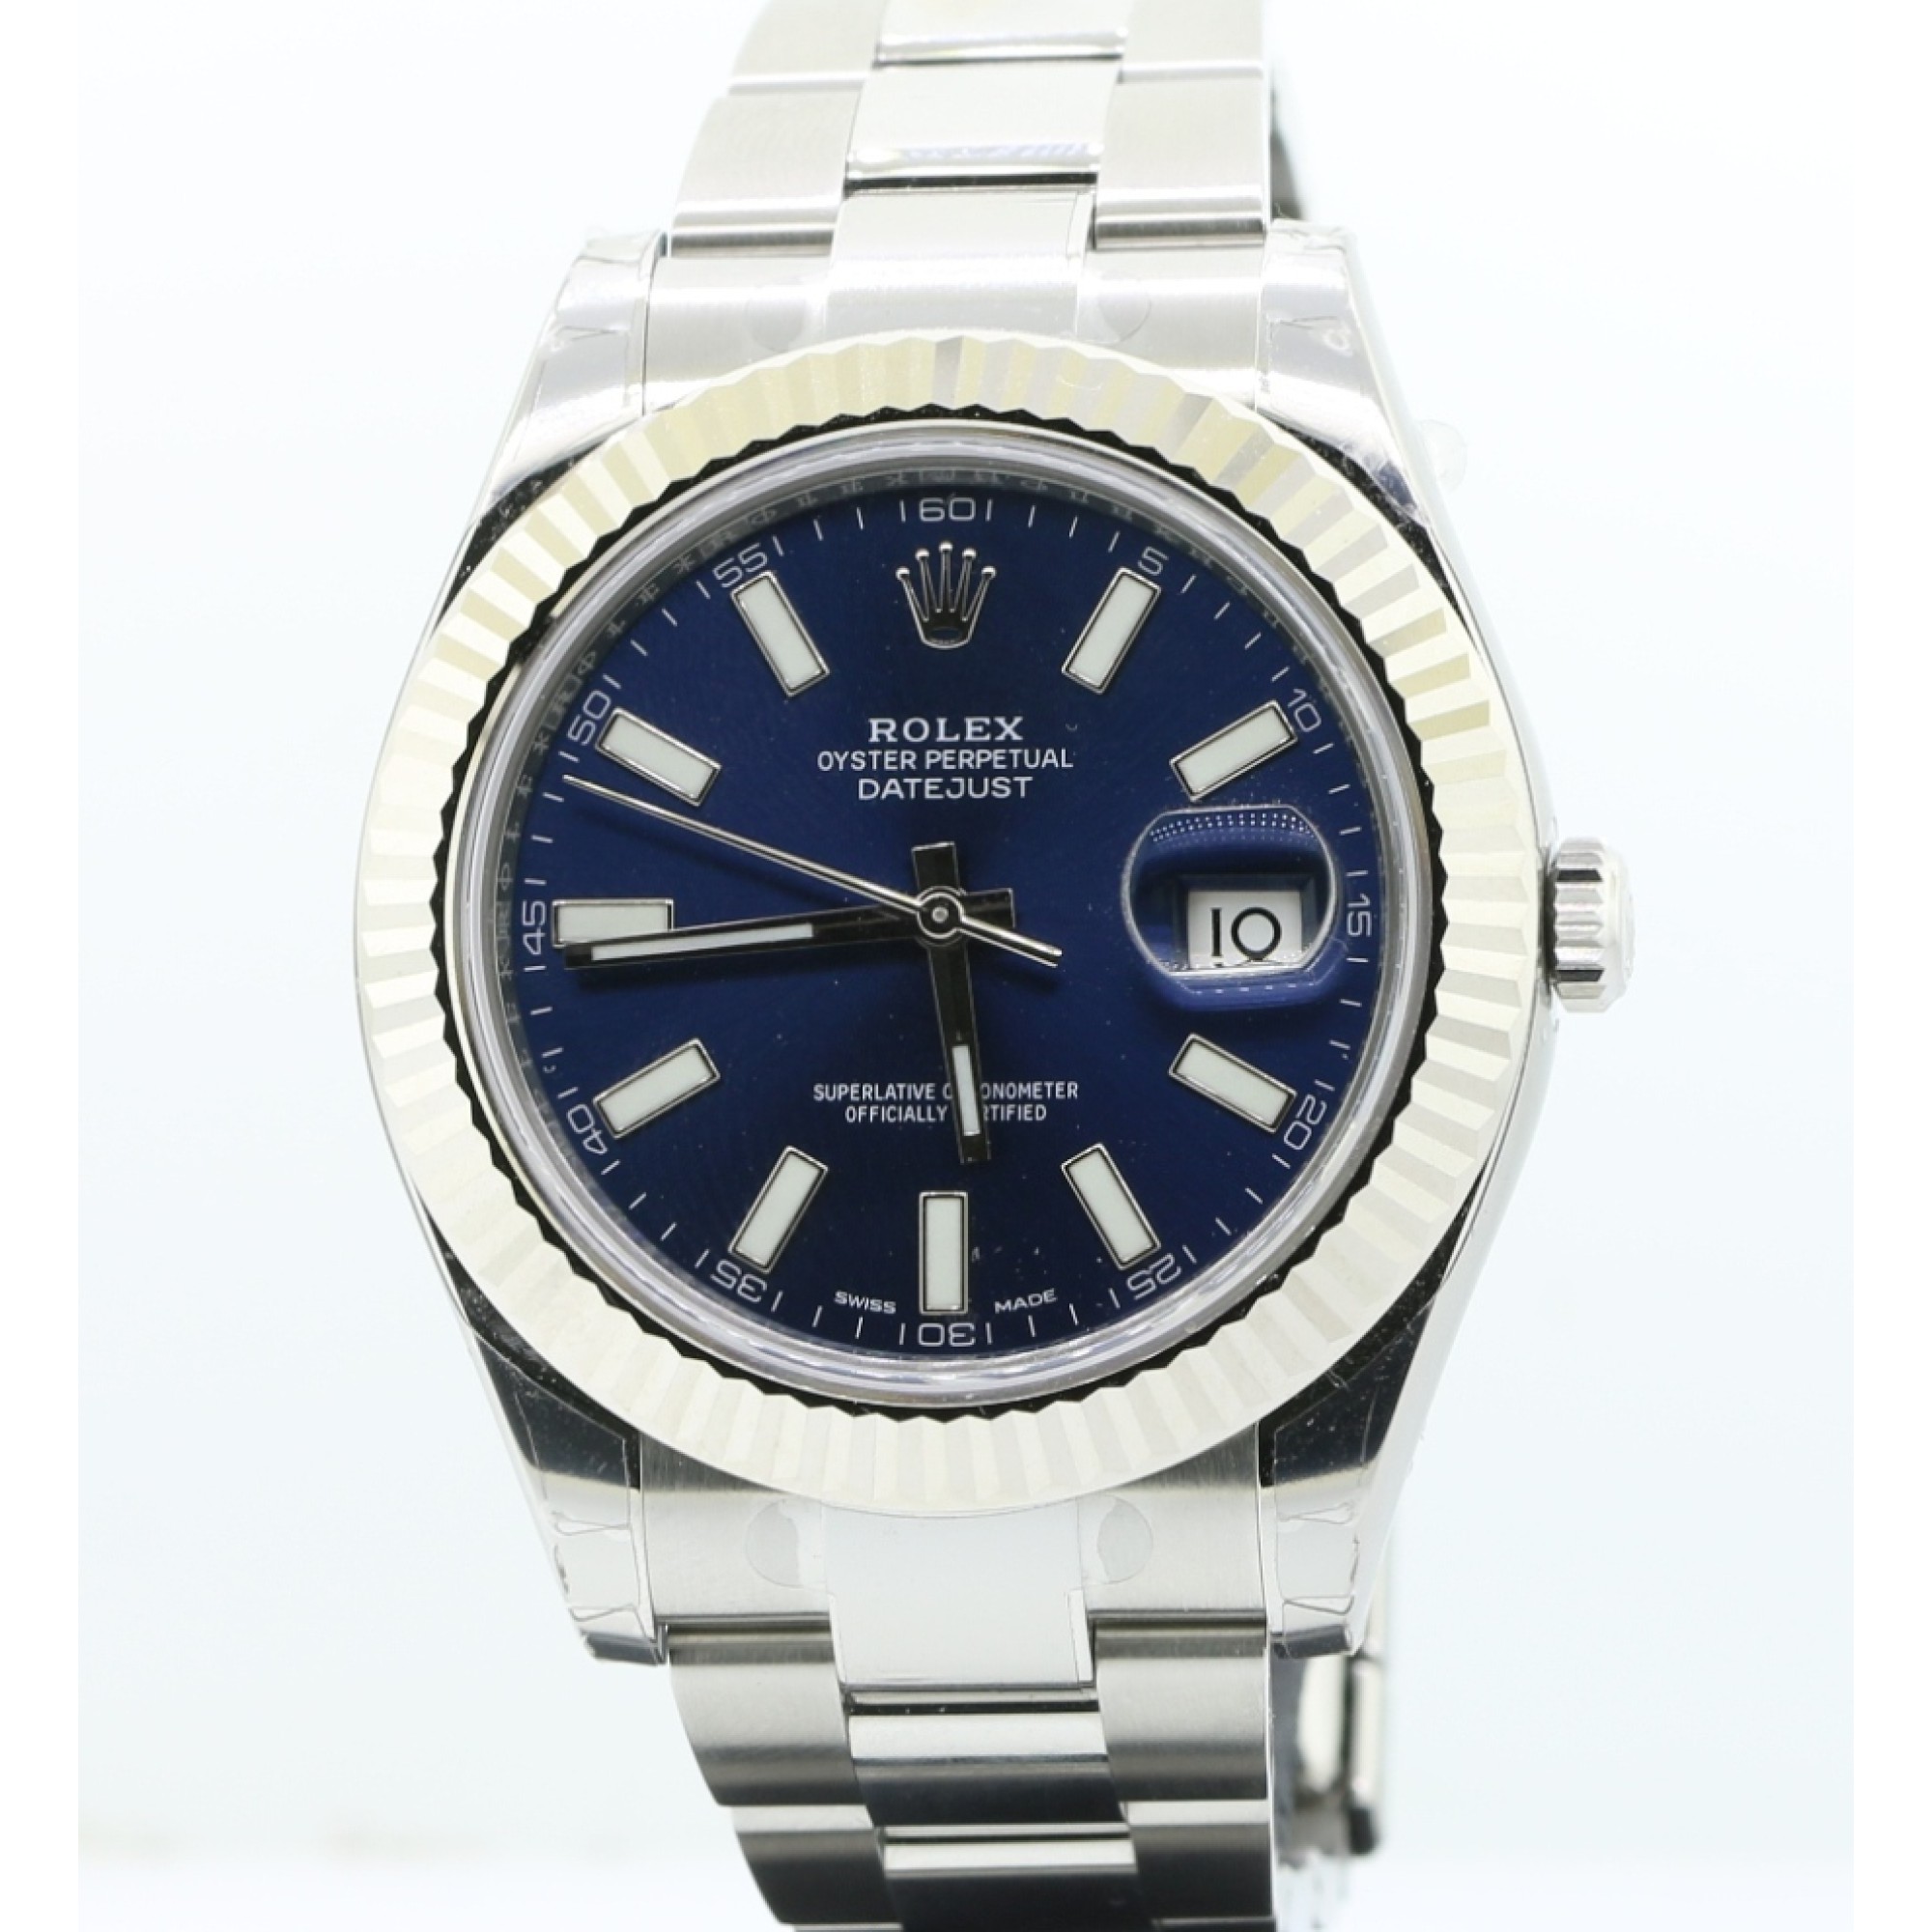 Rolex Datejust II 18K White Gold Fluted Bezel Blue Dial 41mm Automatic Watch,Cheap Diamond Engagement Rings, Buy Cheap Diamond jewelry, Diamond Engagement Rings, engaged rings online, Fine jewelry, best rings,engaged ring,